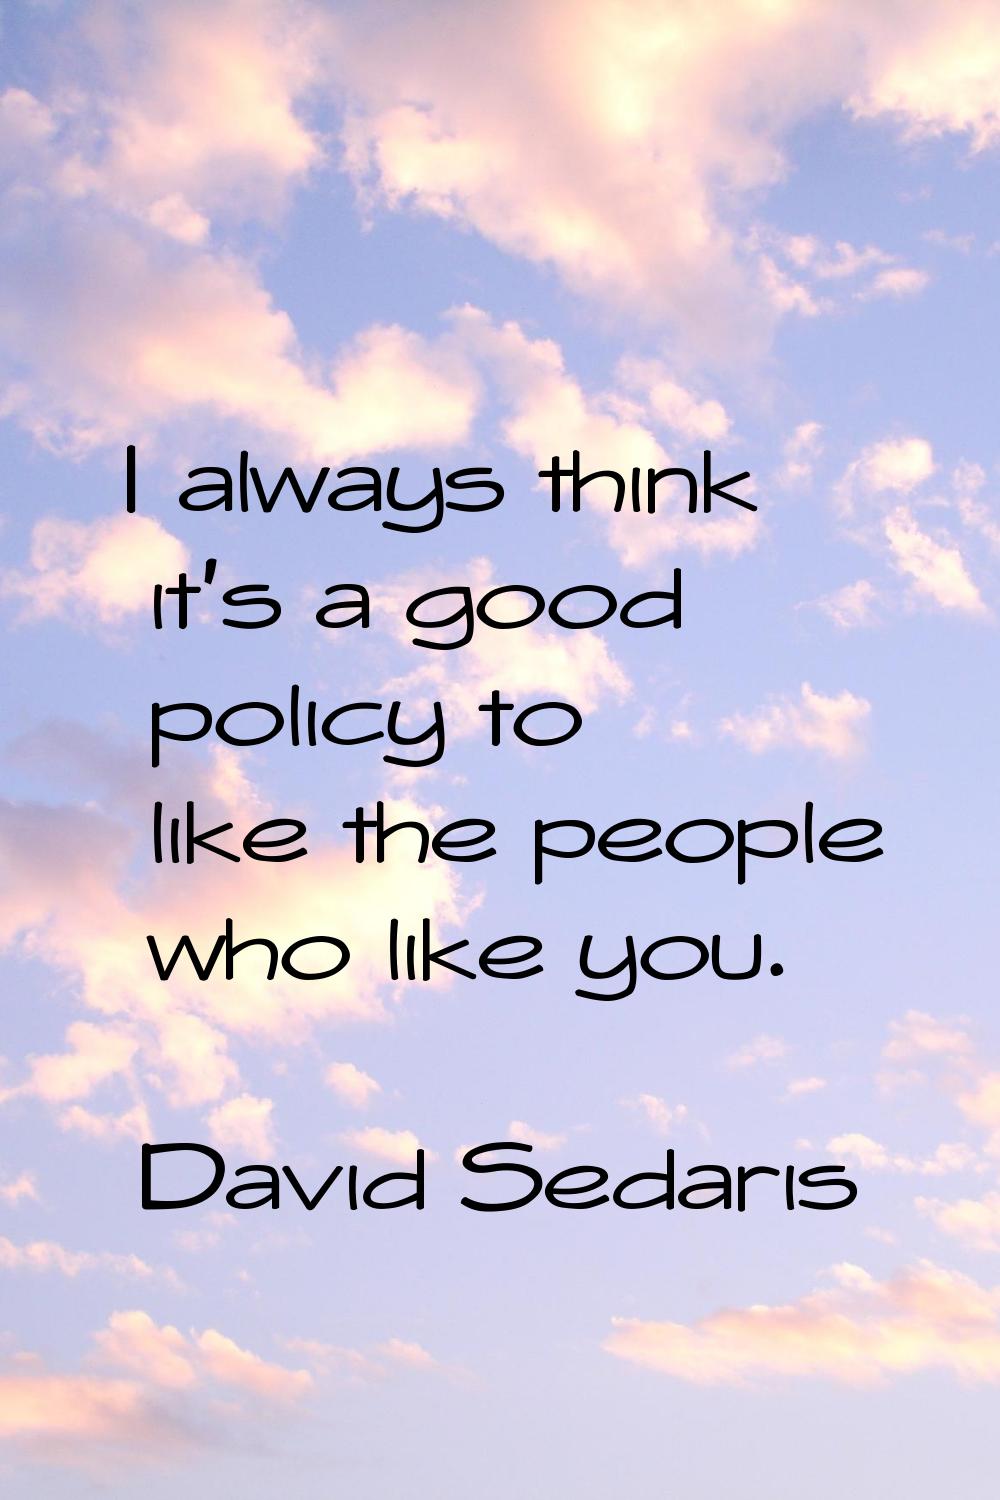 I always think it's a good policy to like the people who like you.